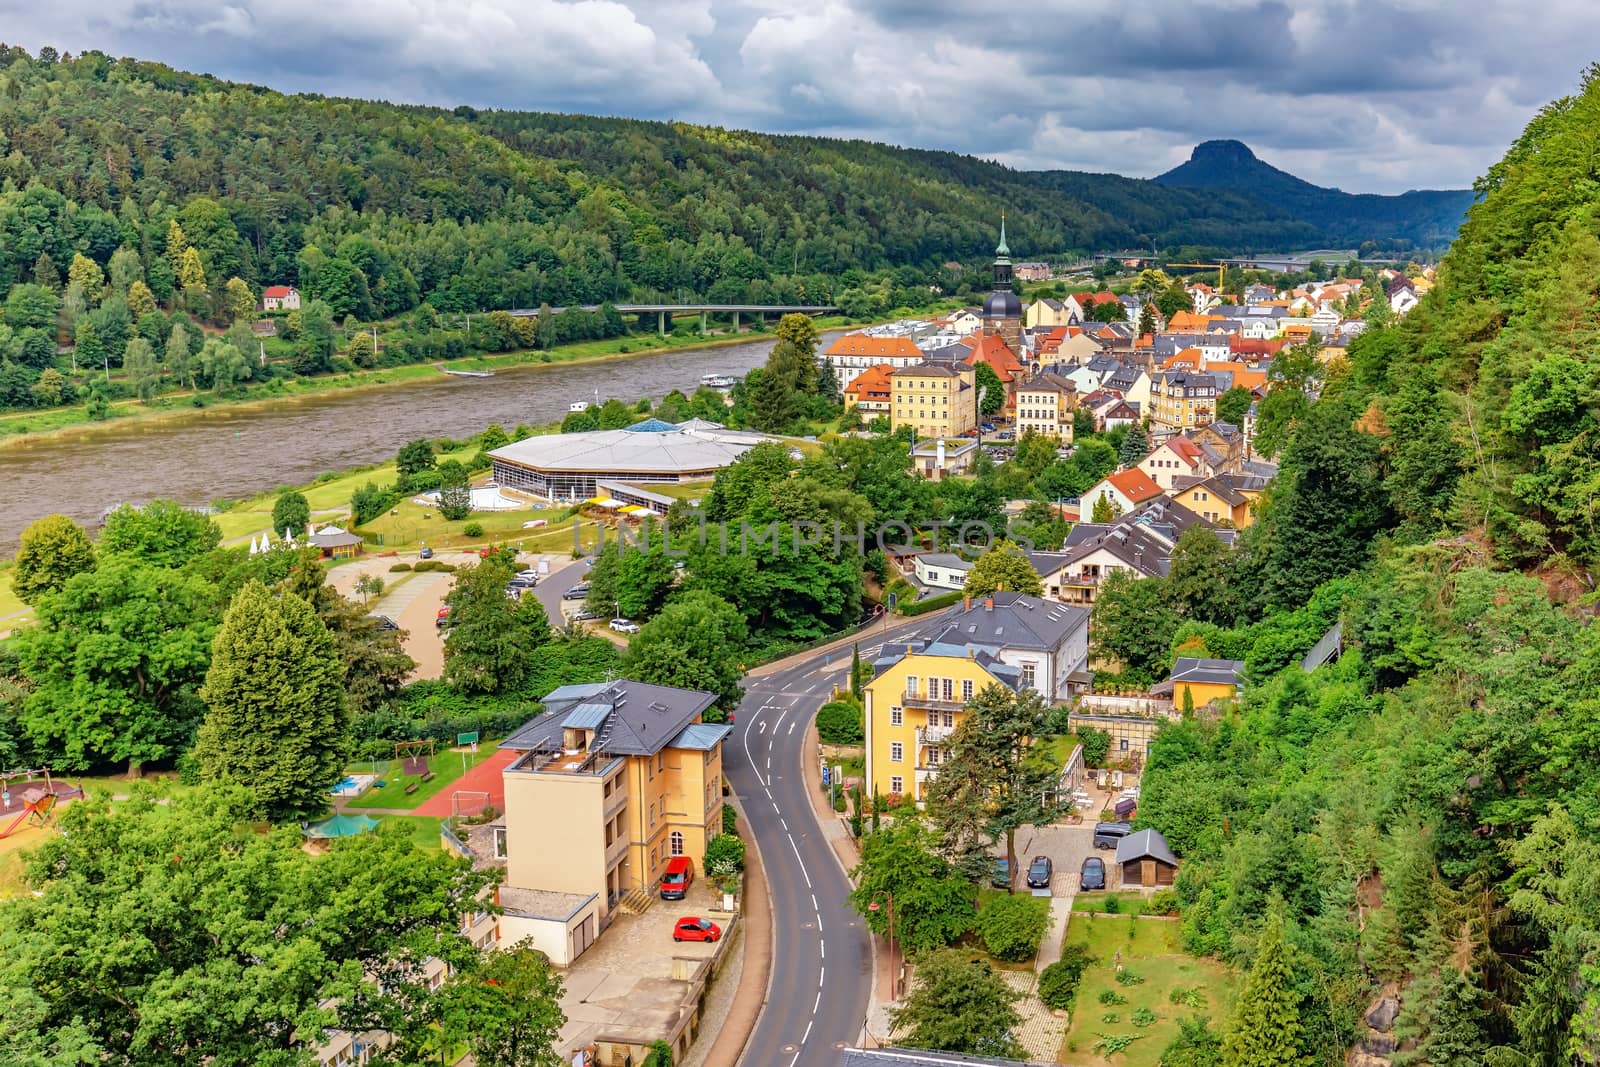 Top view of the spa town of Bad Schandau, Dresden, Germany by seka33